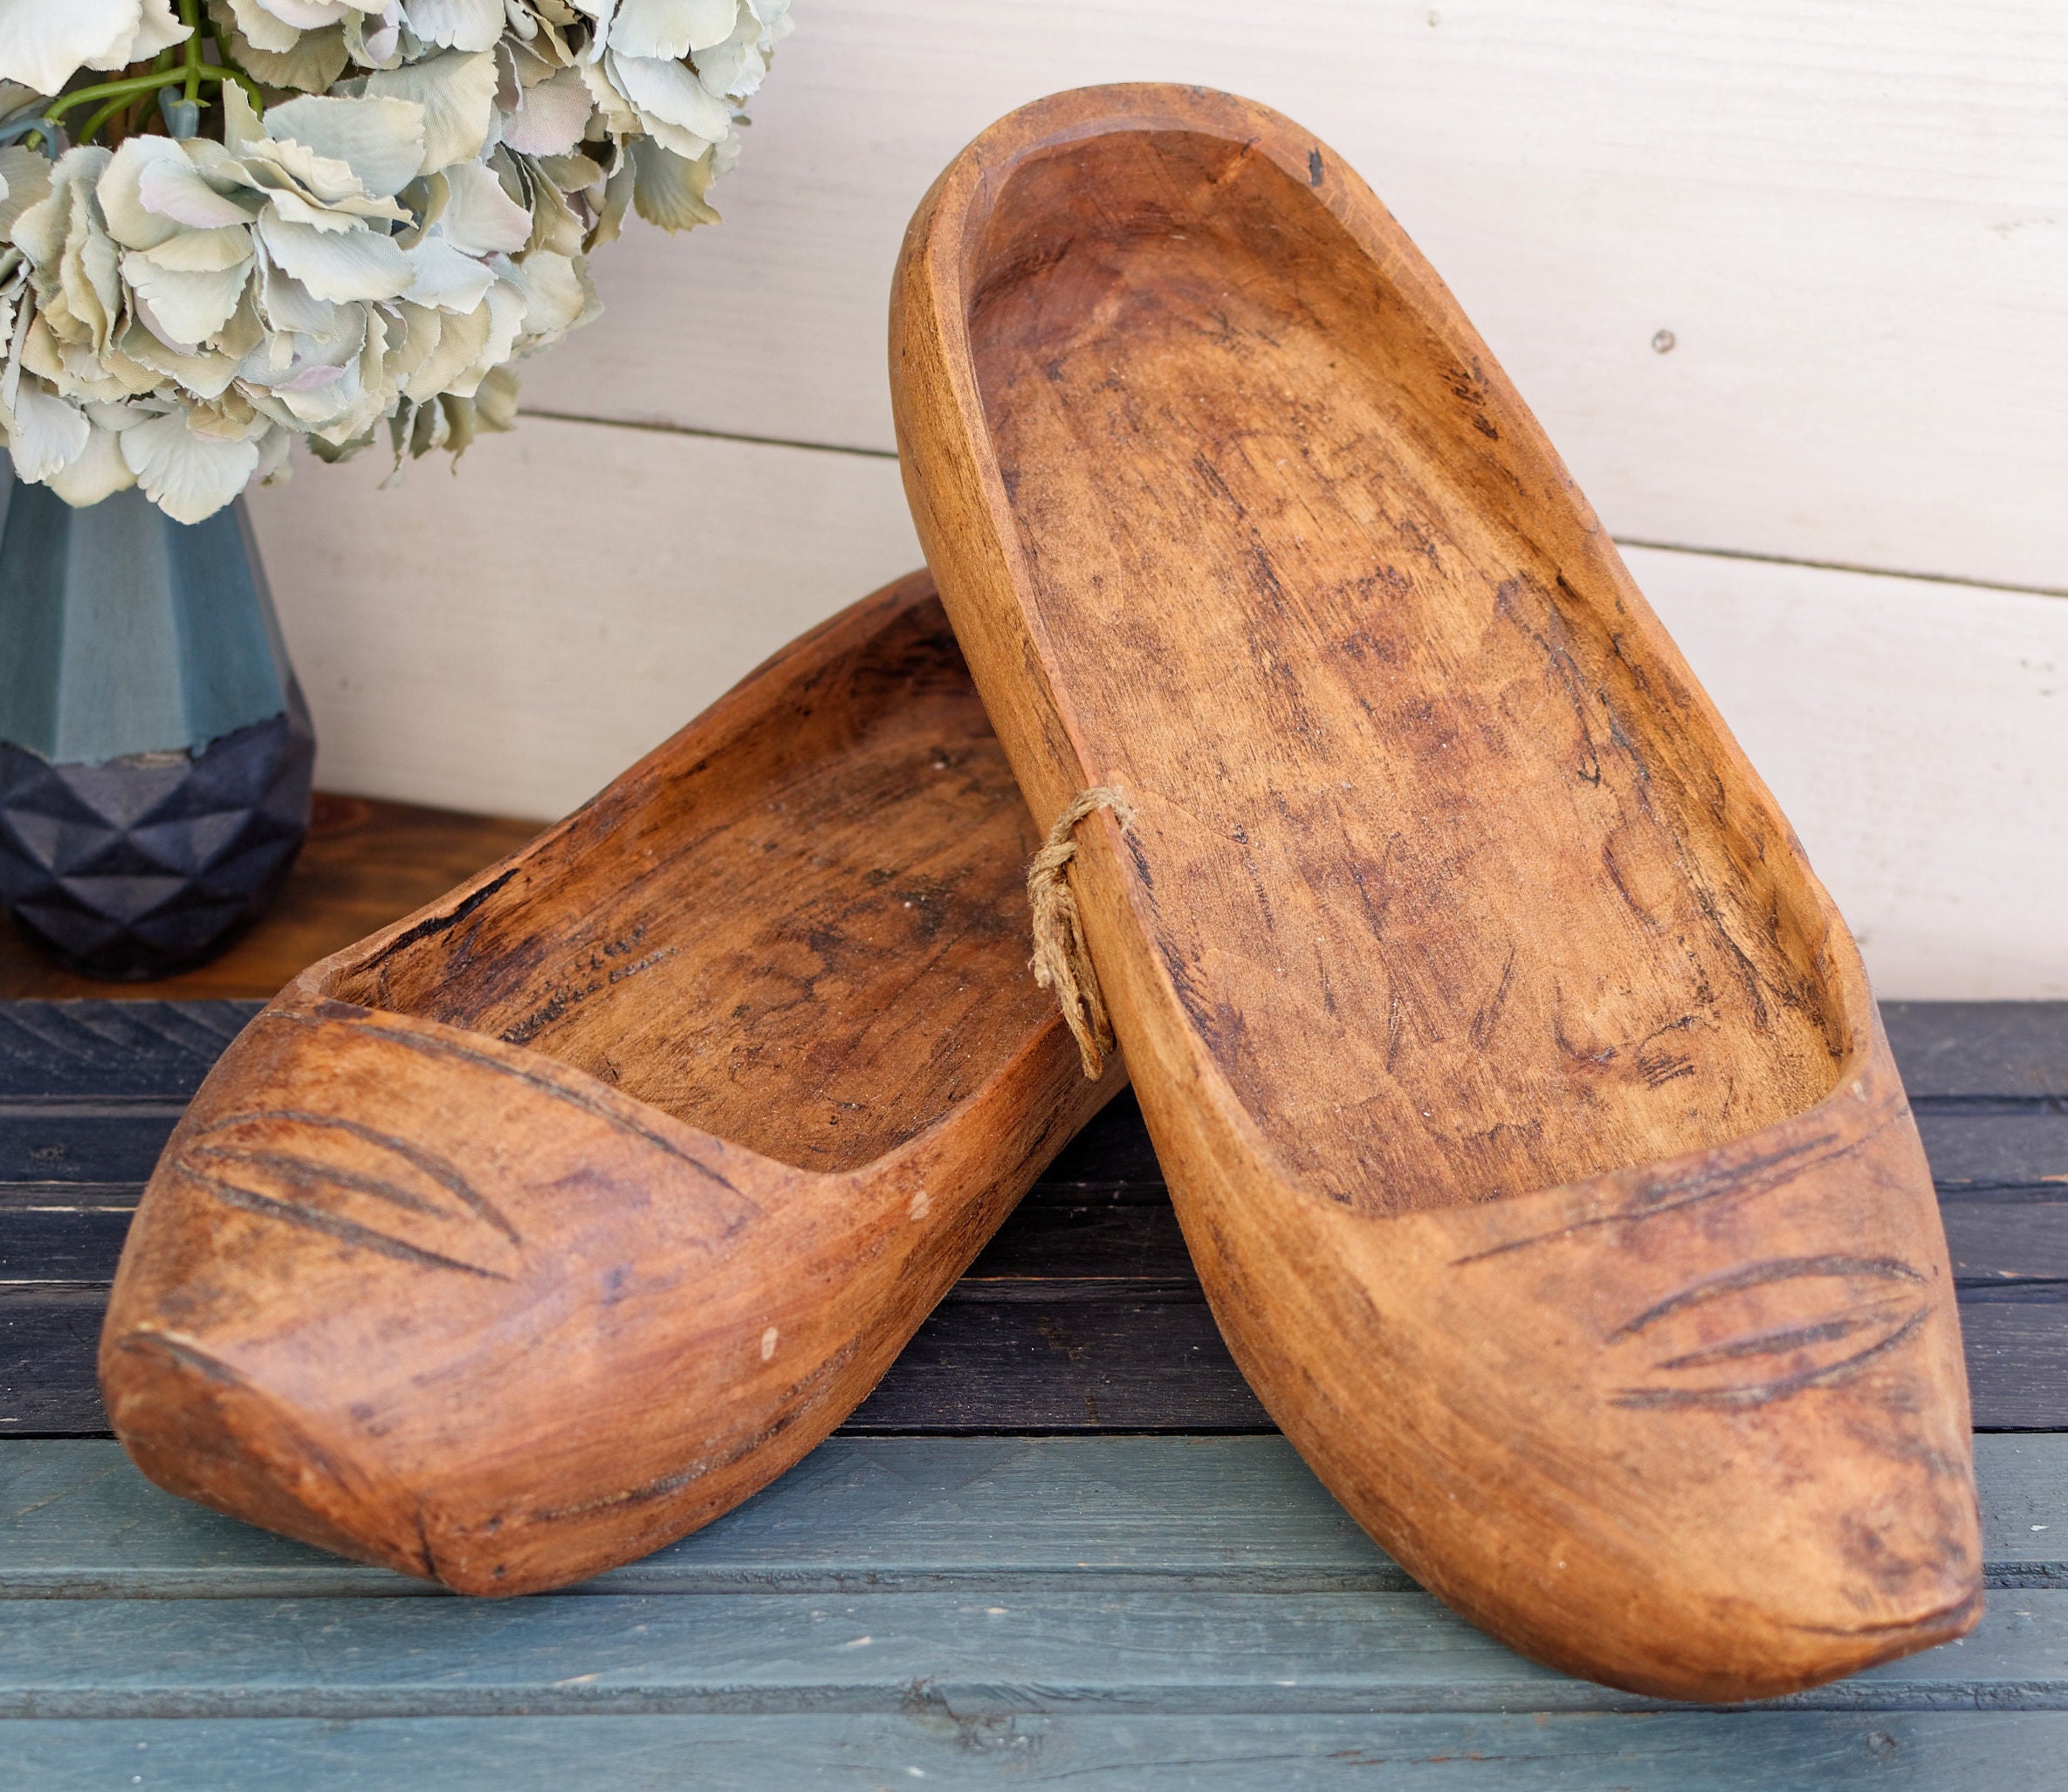 1 Pair Small Vintage Wooden Shoes Scandinavian Gnome Shoes Rustic